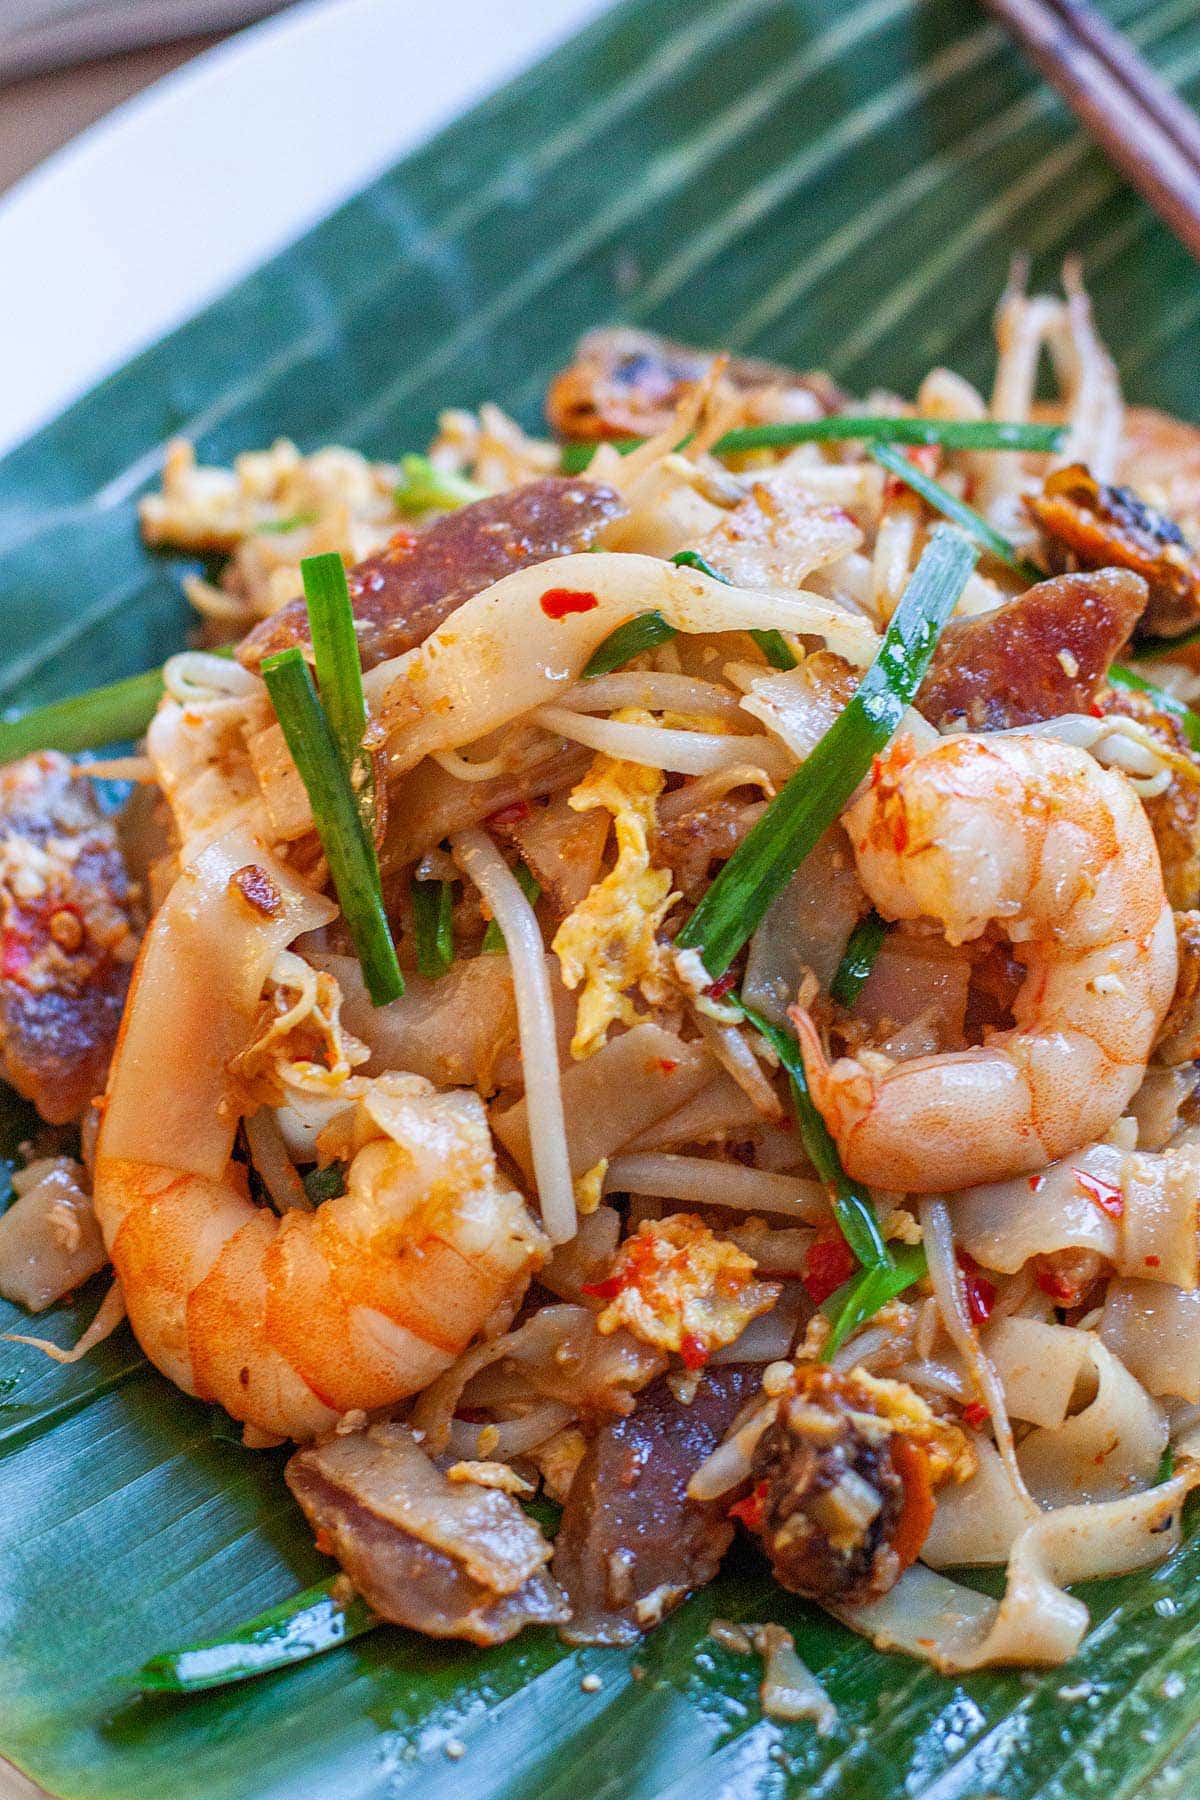 Authentic Penang Char Kuey Teow with step-by-step recipe guide. Char Kuey Teow is a famous Penang hawker food. The best Char Kuey Teow recipe on the web. | rasamalaysia.com